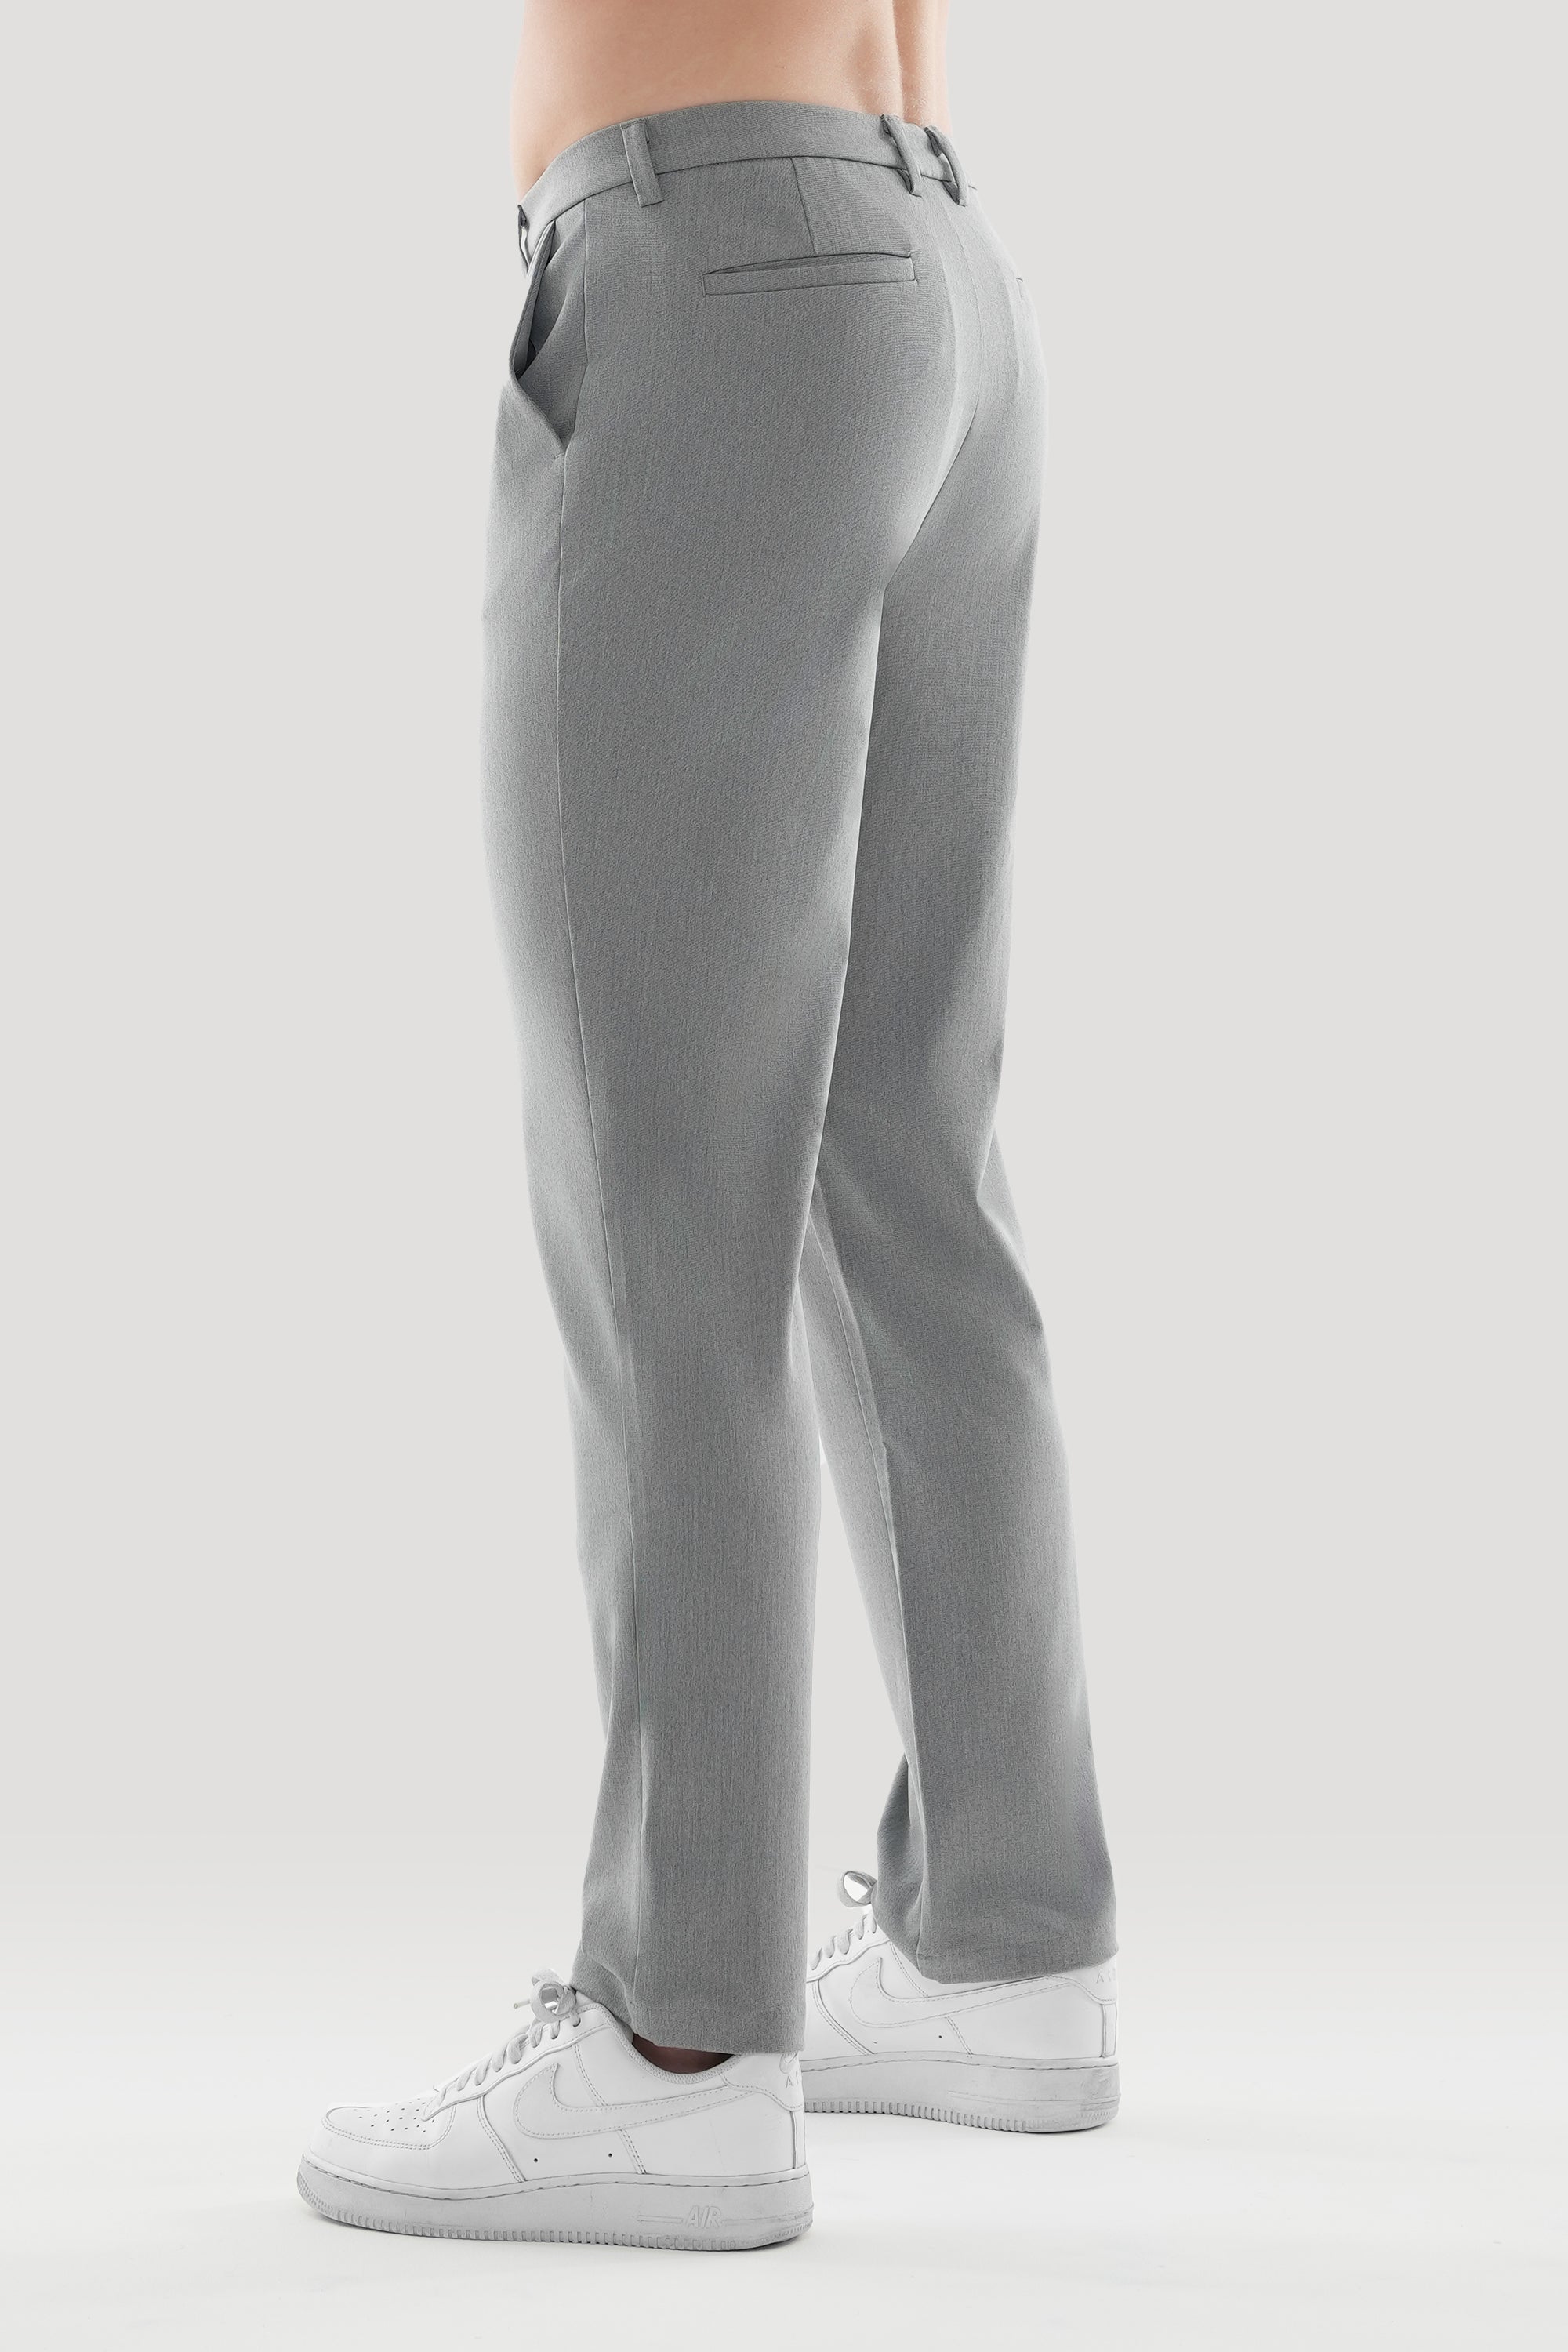 THE LUCIA TROUSERS - LIGHT GREY - ICON. AMSTERDAM